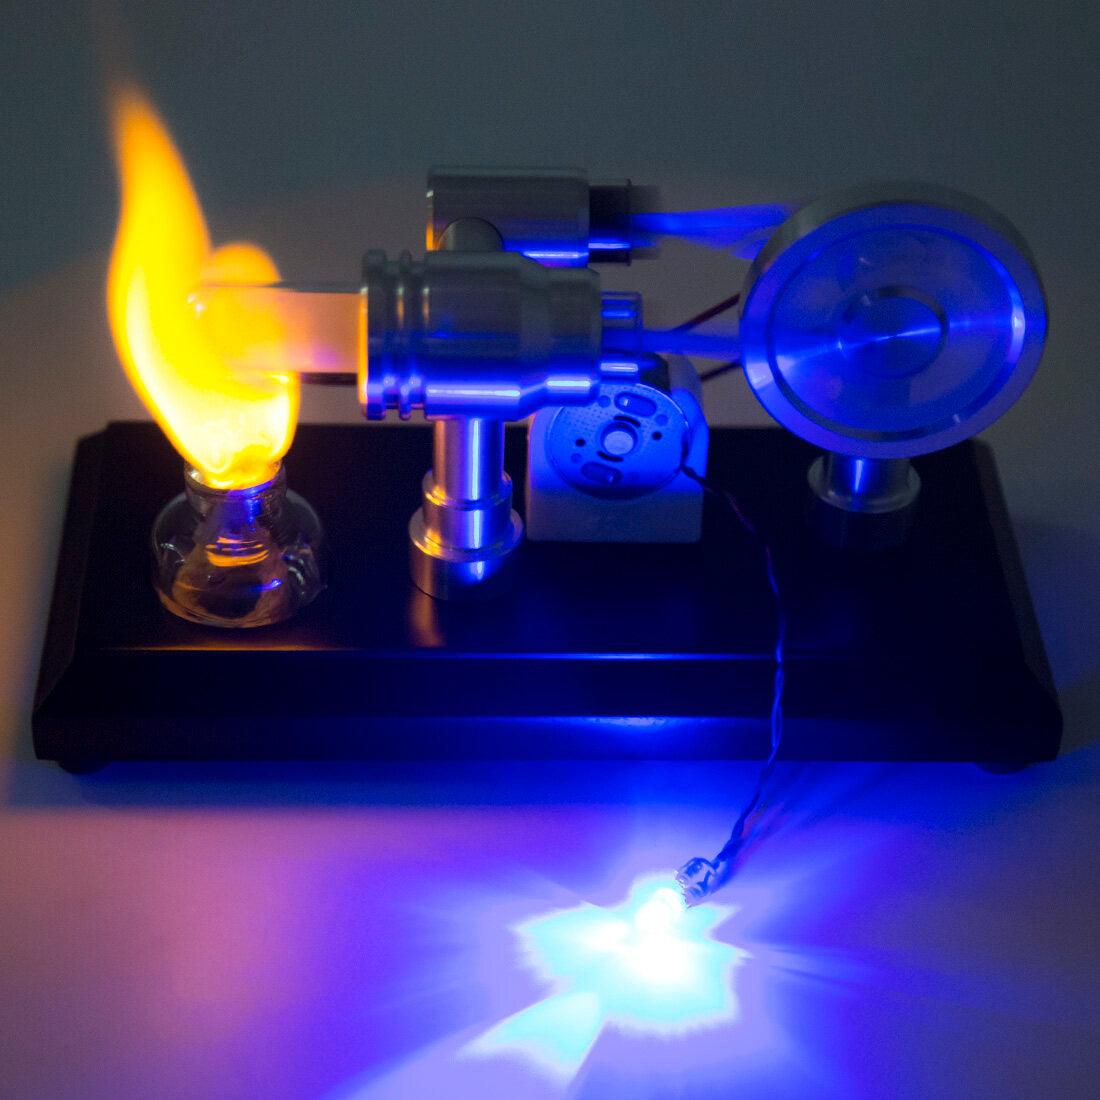 Double-Cylinder Stirling Engine Kit - Power Up Your Space with Stunning LED Lights enginediyshop